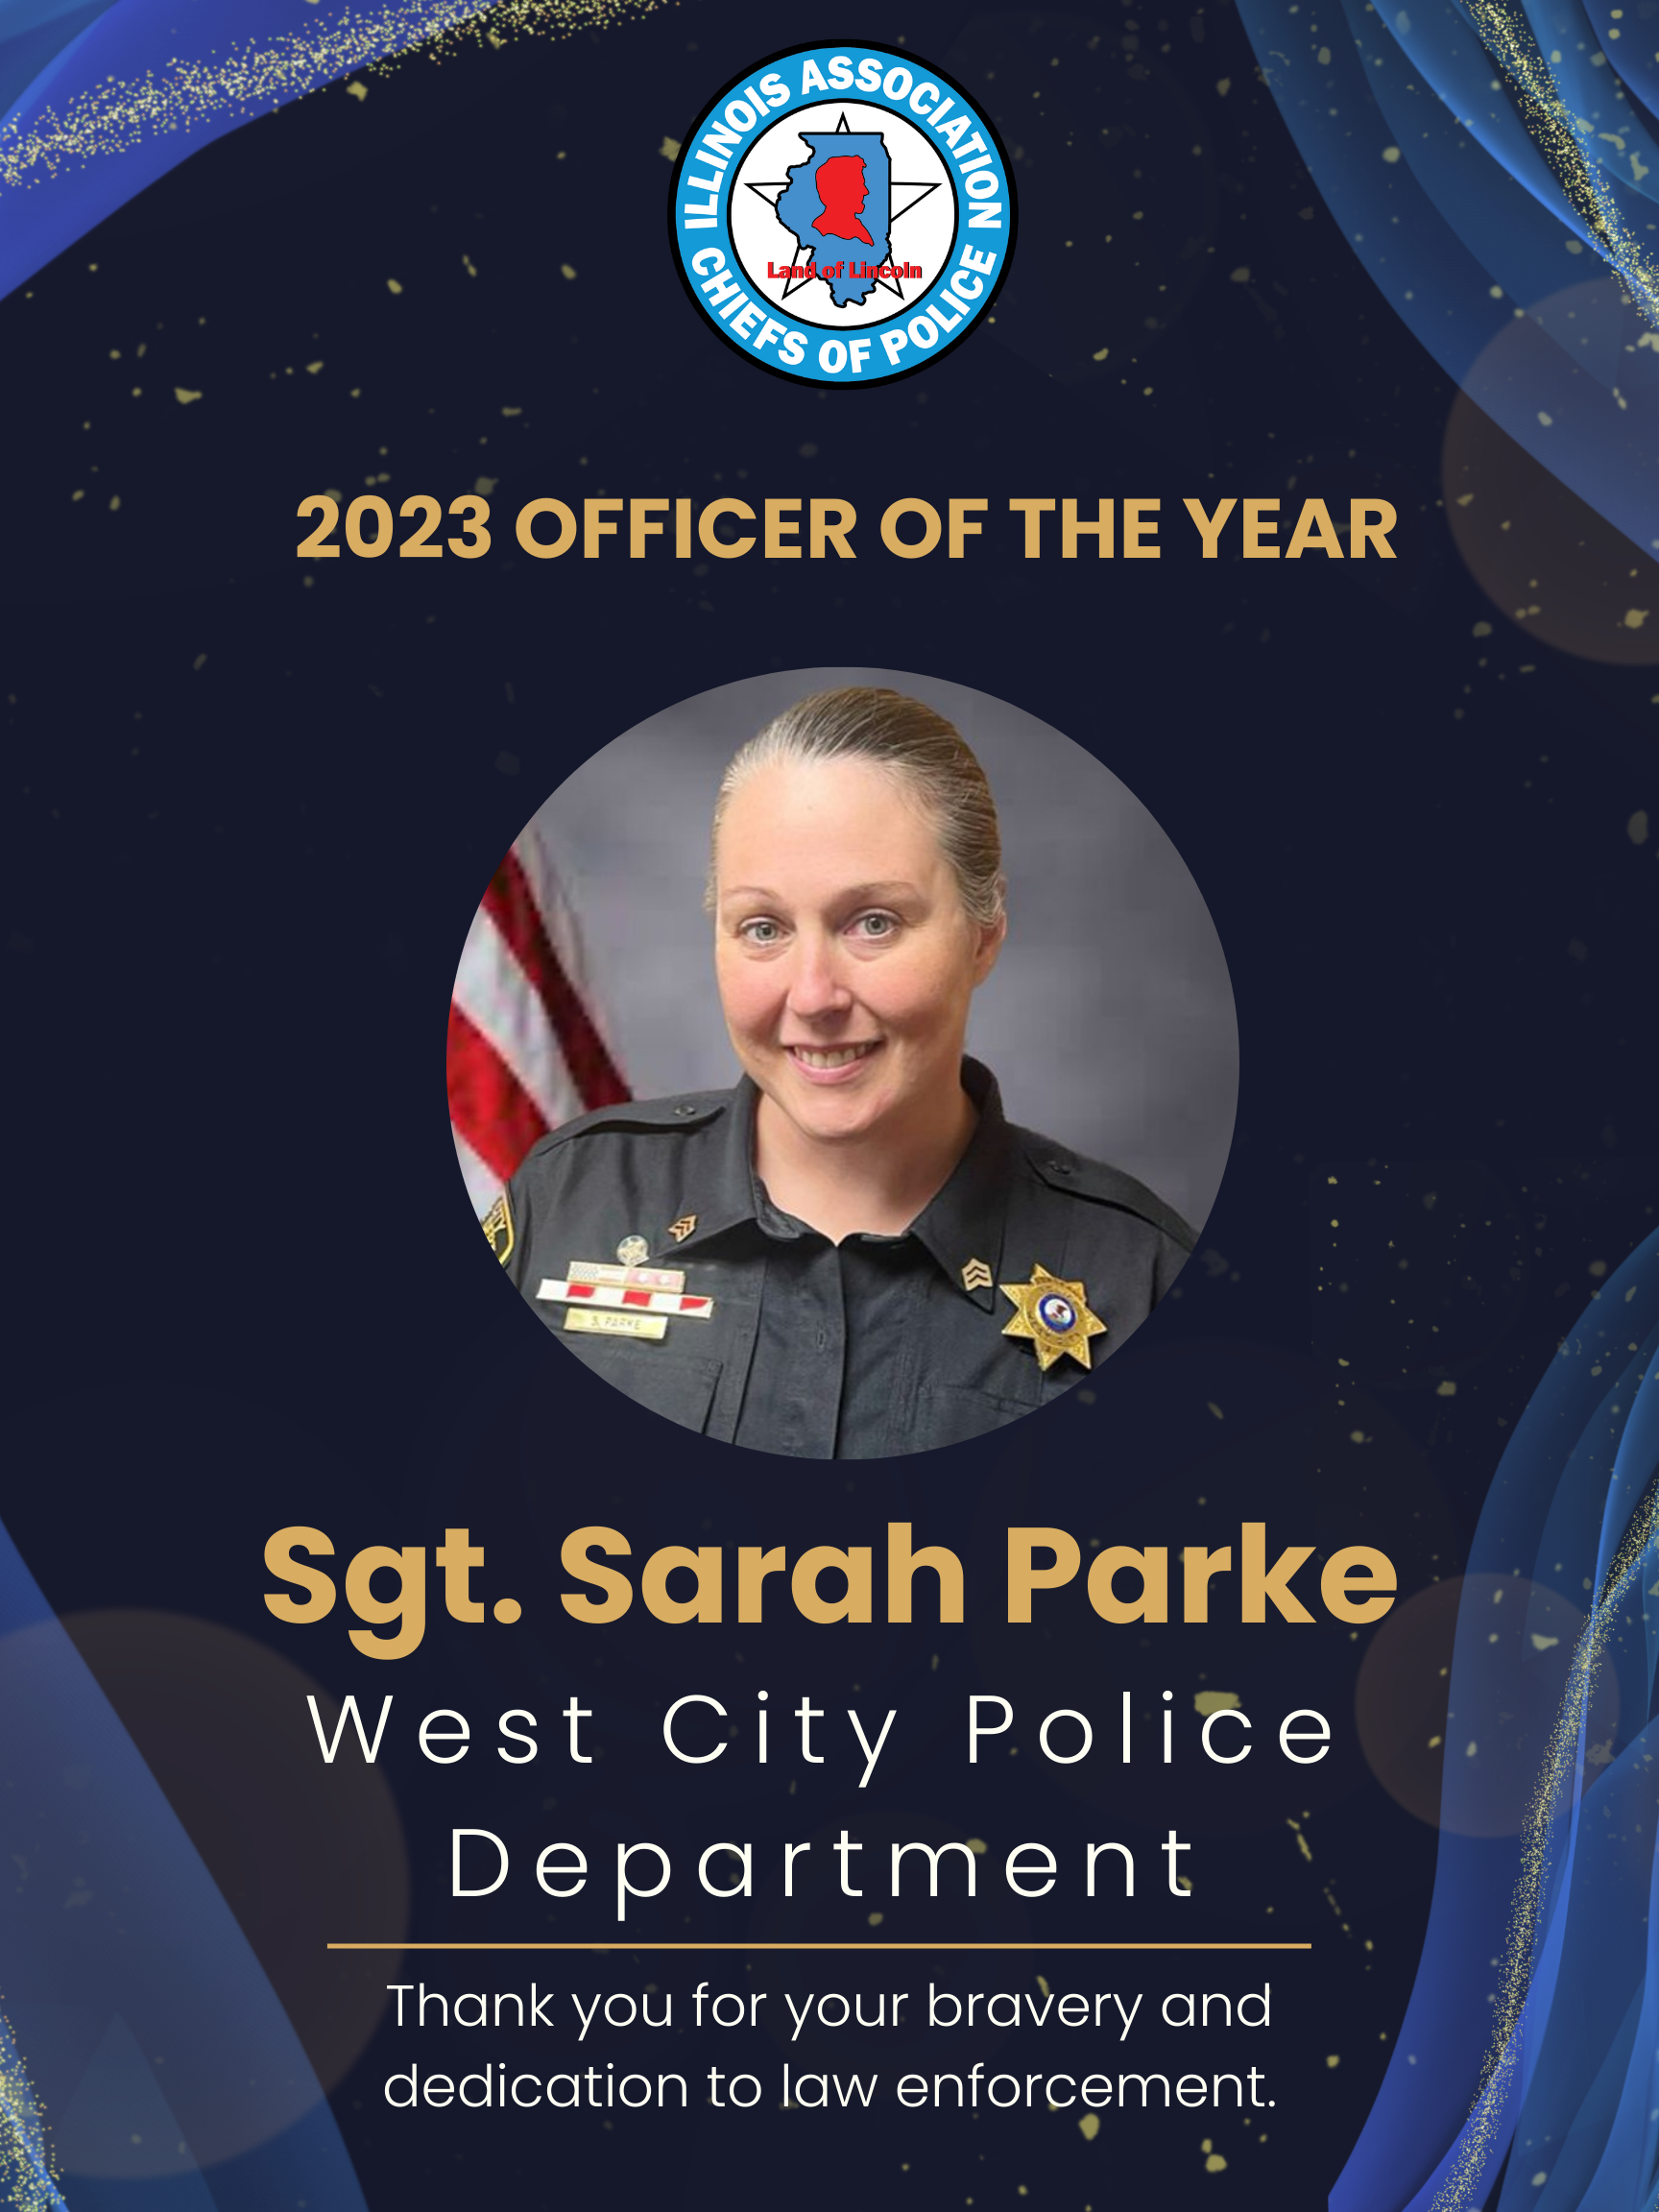 Sgt. Sarah Parke Named Officer of the Year